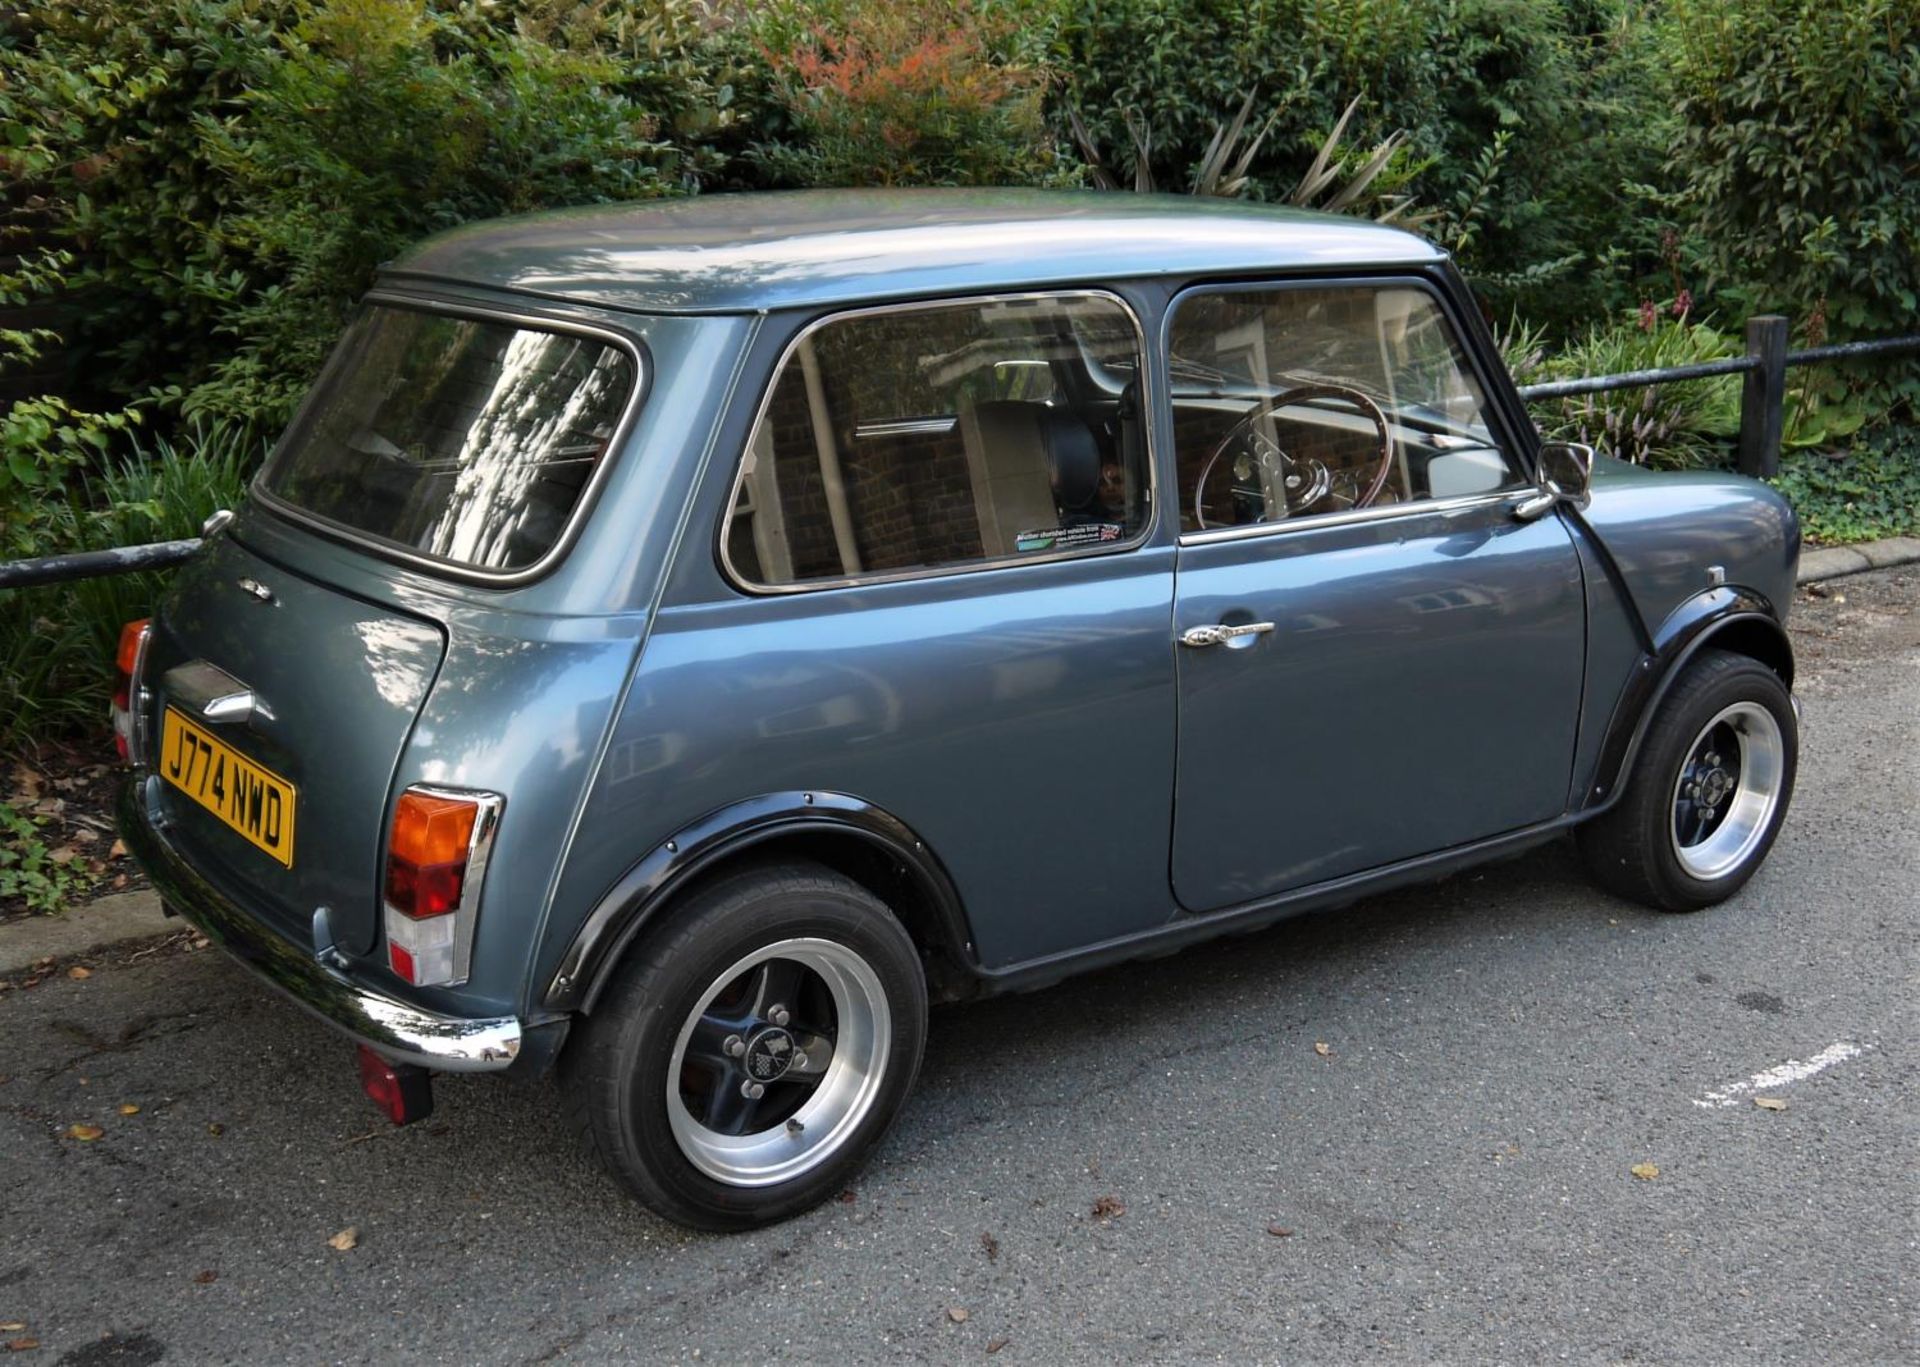 1991 ROVER MINI NEON Registration Number: J774 NWD Recorded Mileage: 58,000 miles Chassis Number: - Image 3 of 24